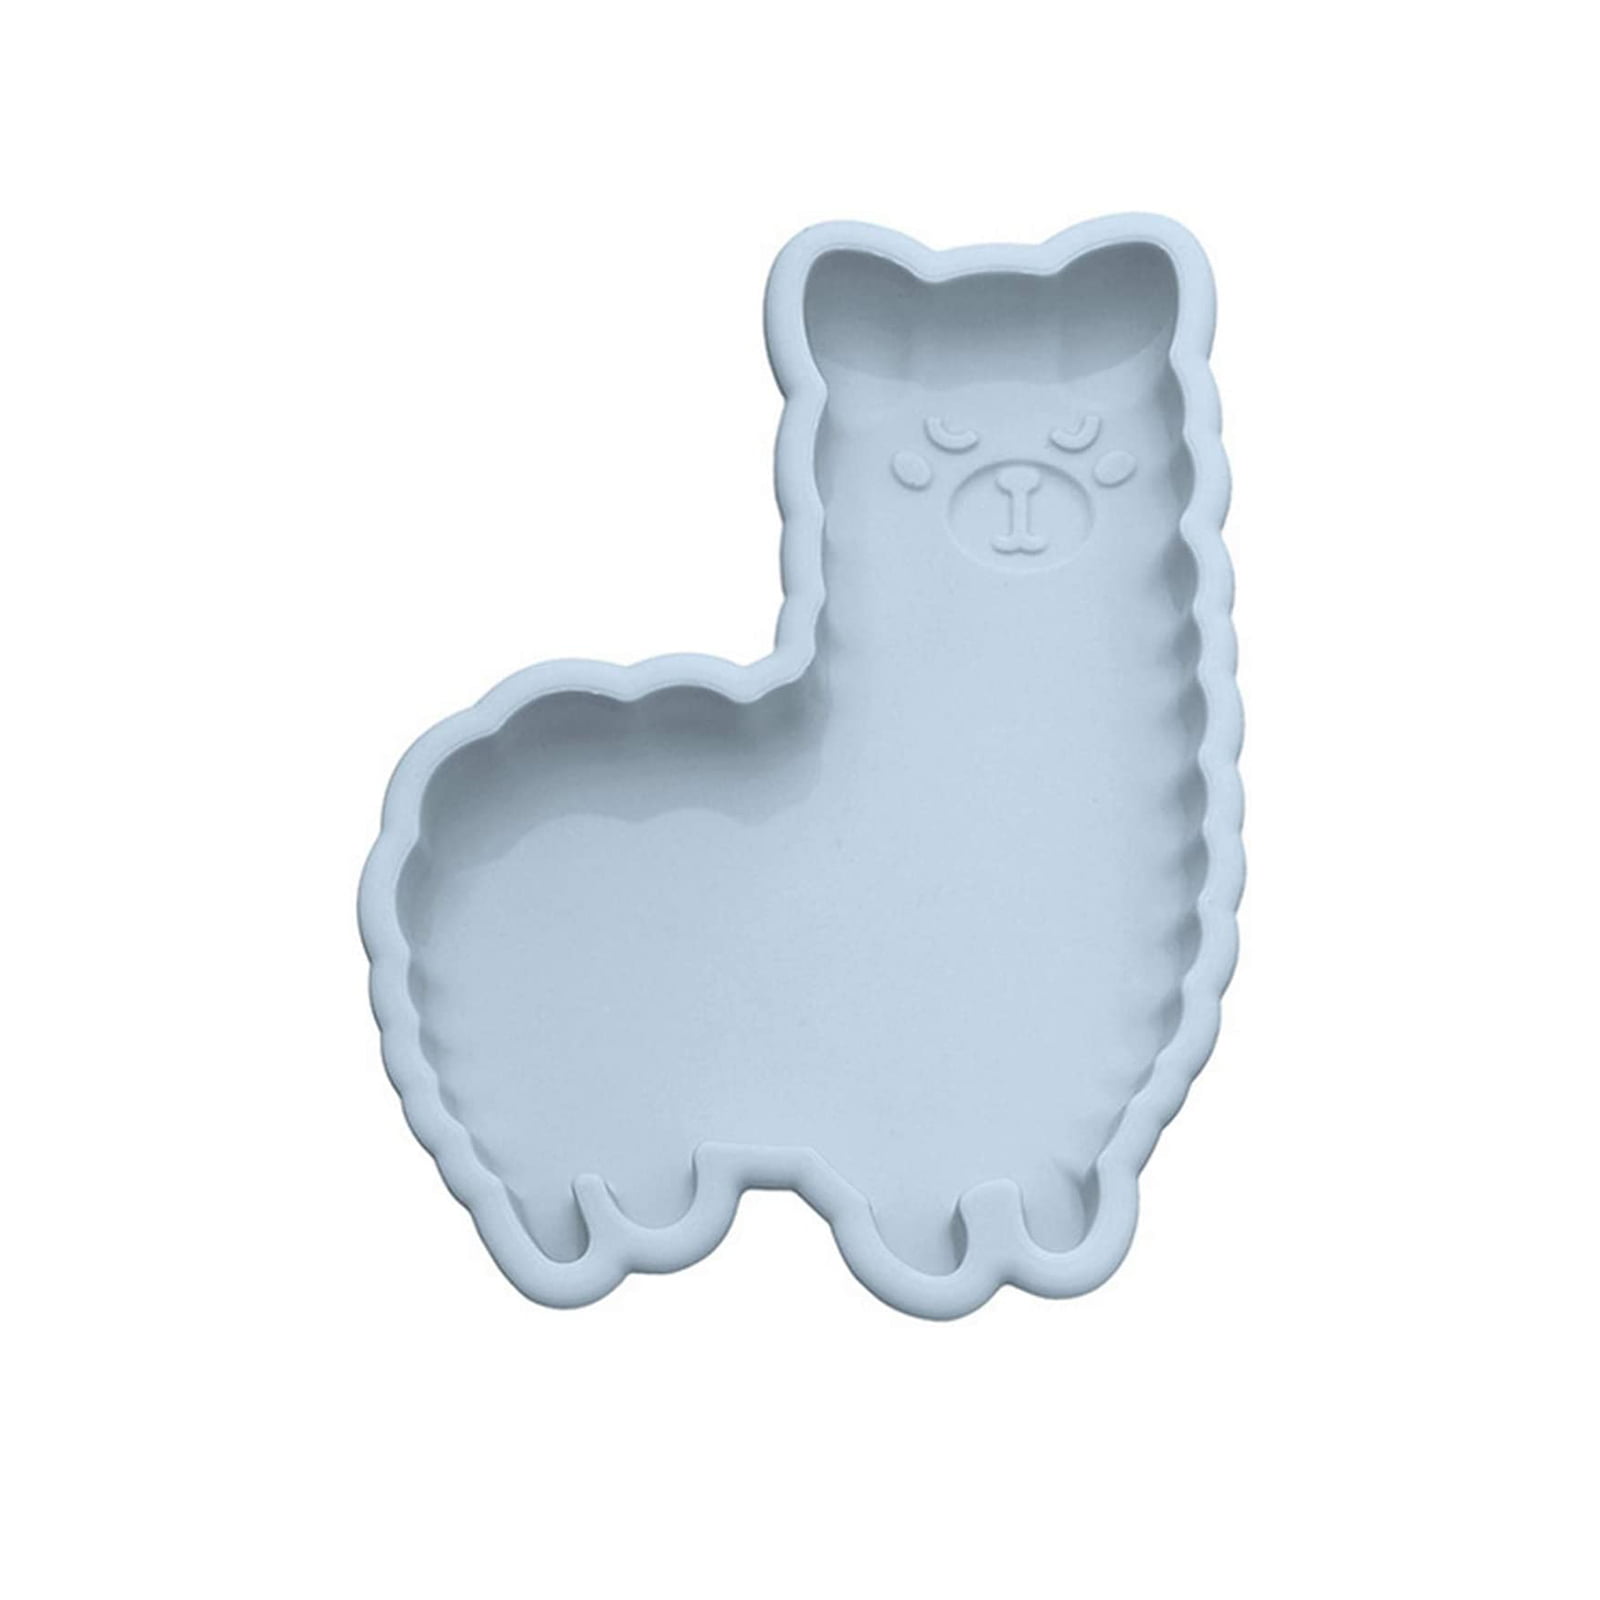 1Pc Drop Glue Jewelry Cake Cookies Biscuit DIY Baking Alpaca Shape Silicone Mold 